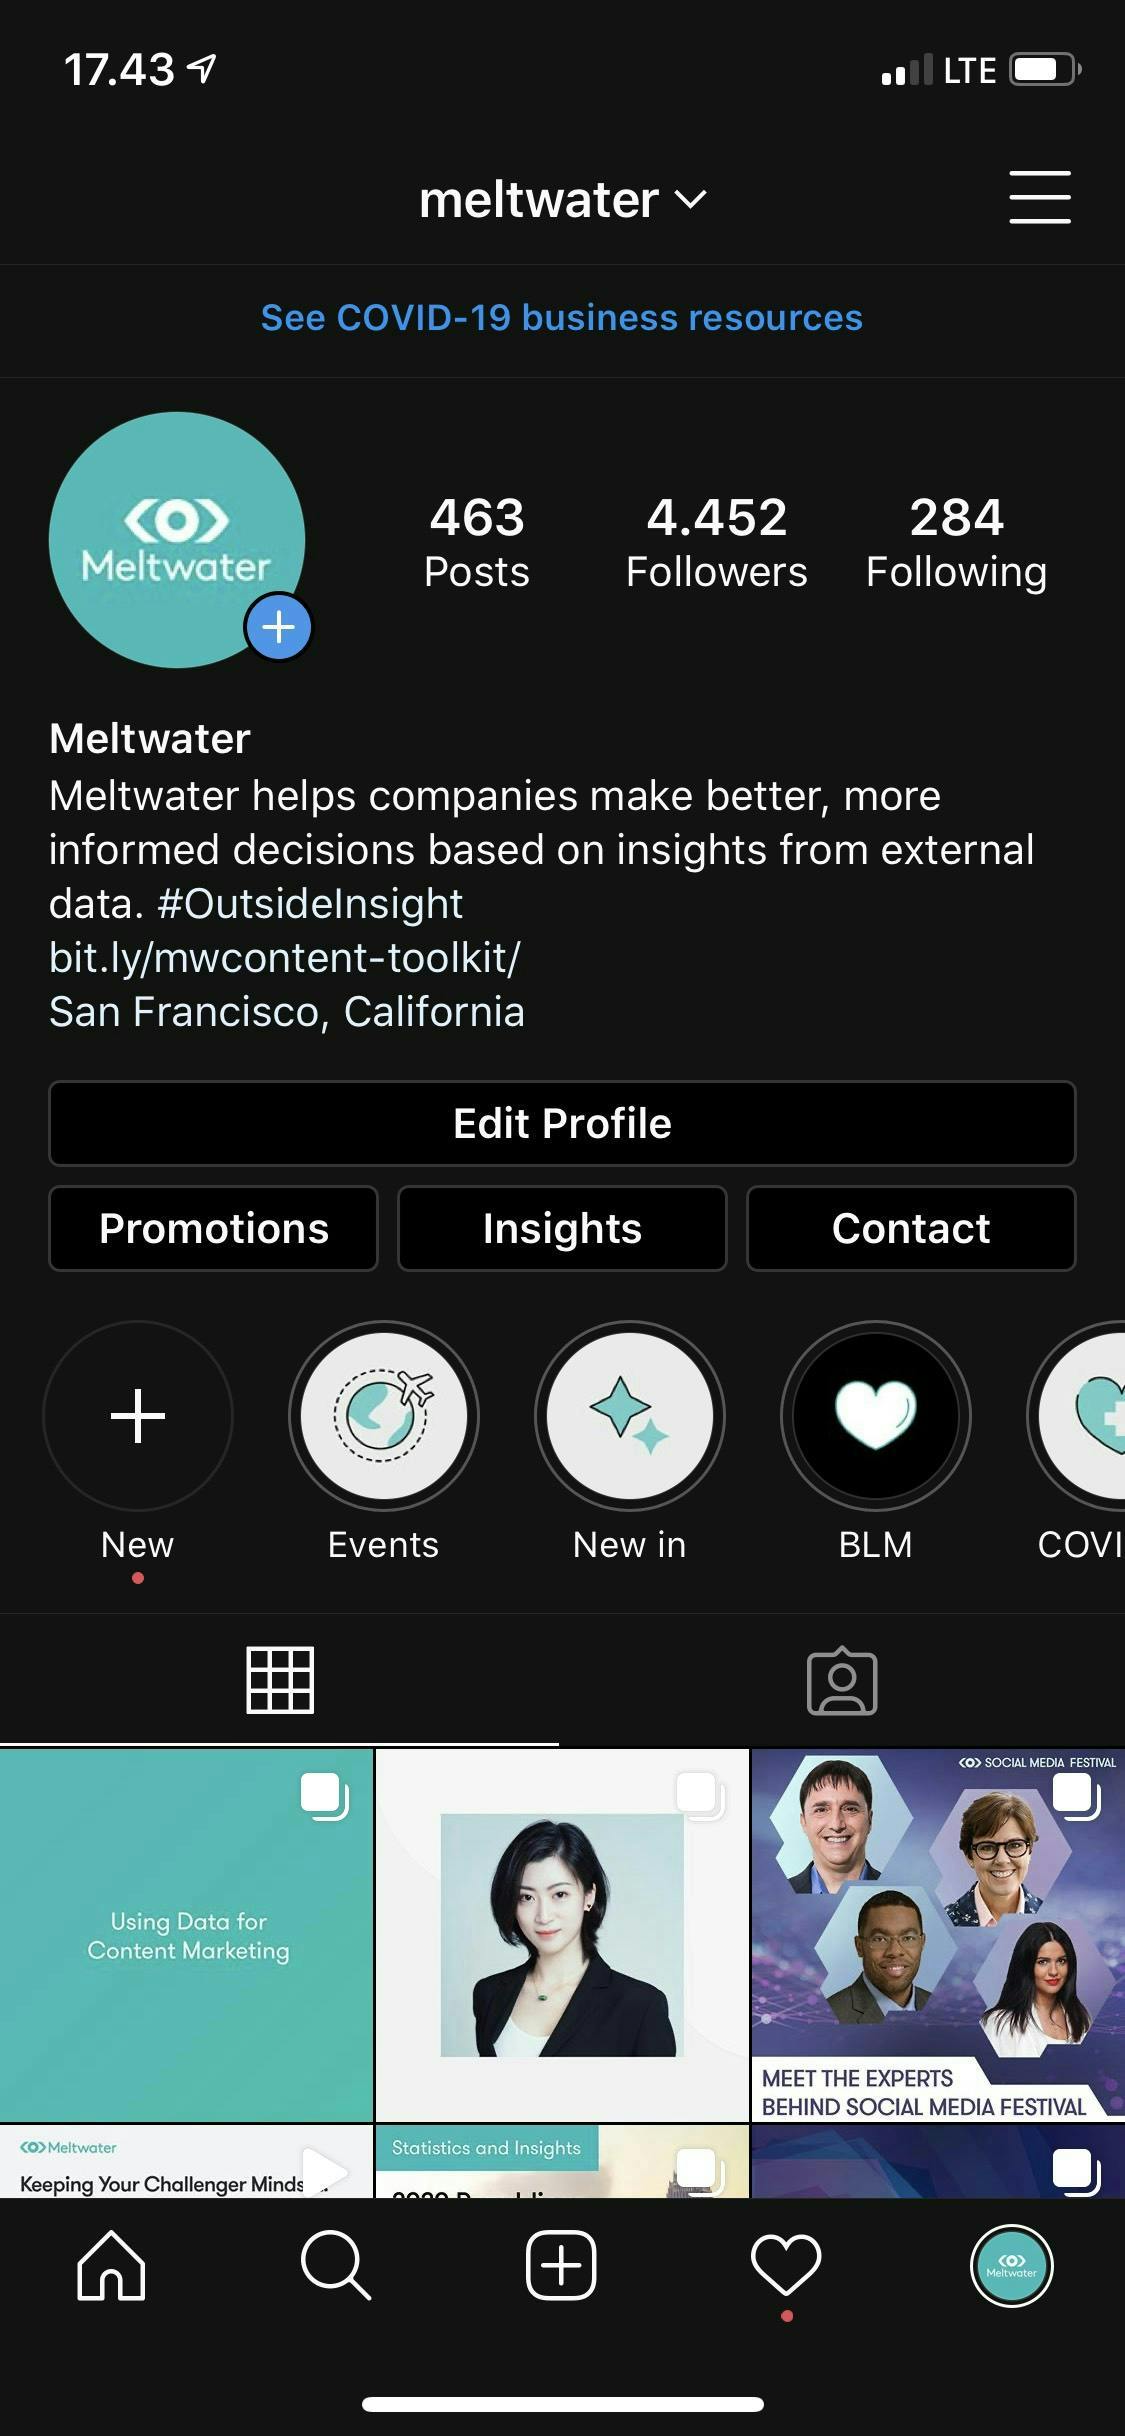 A screenshot of Meltwater's Instagram profile